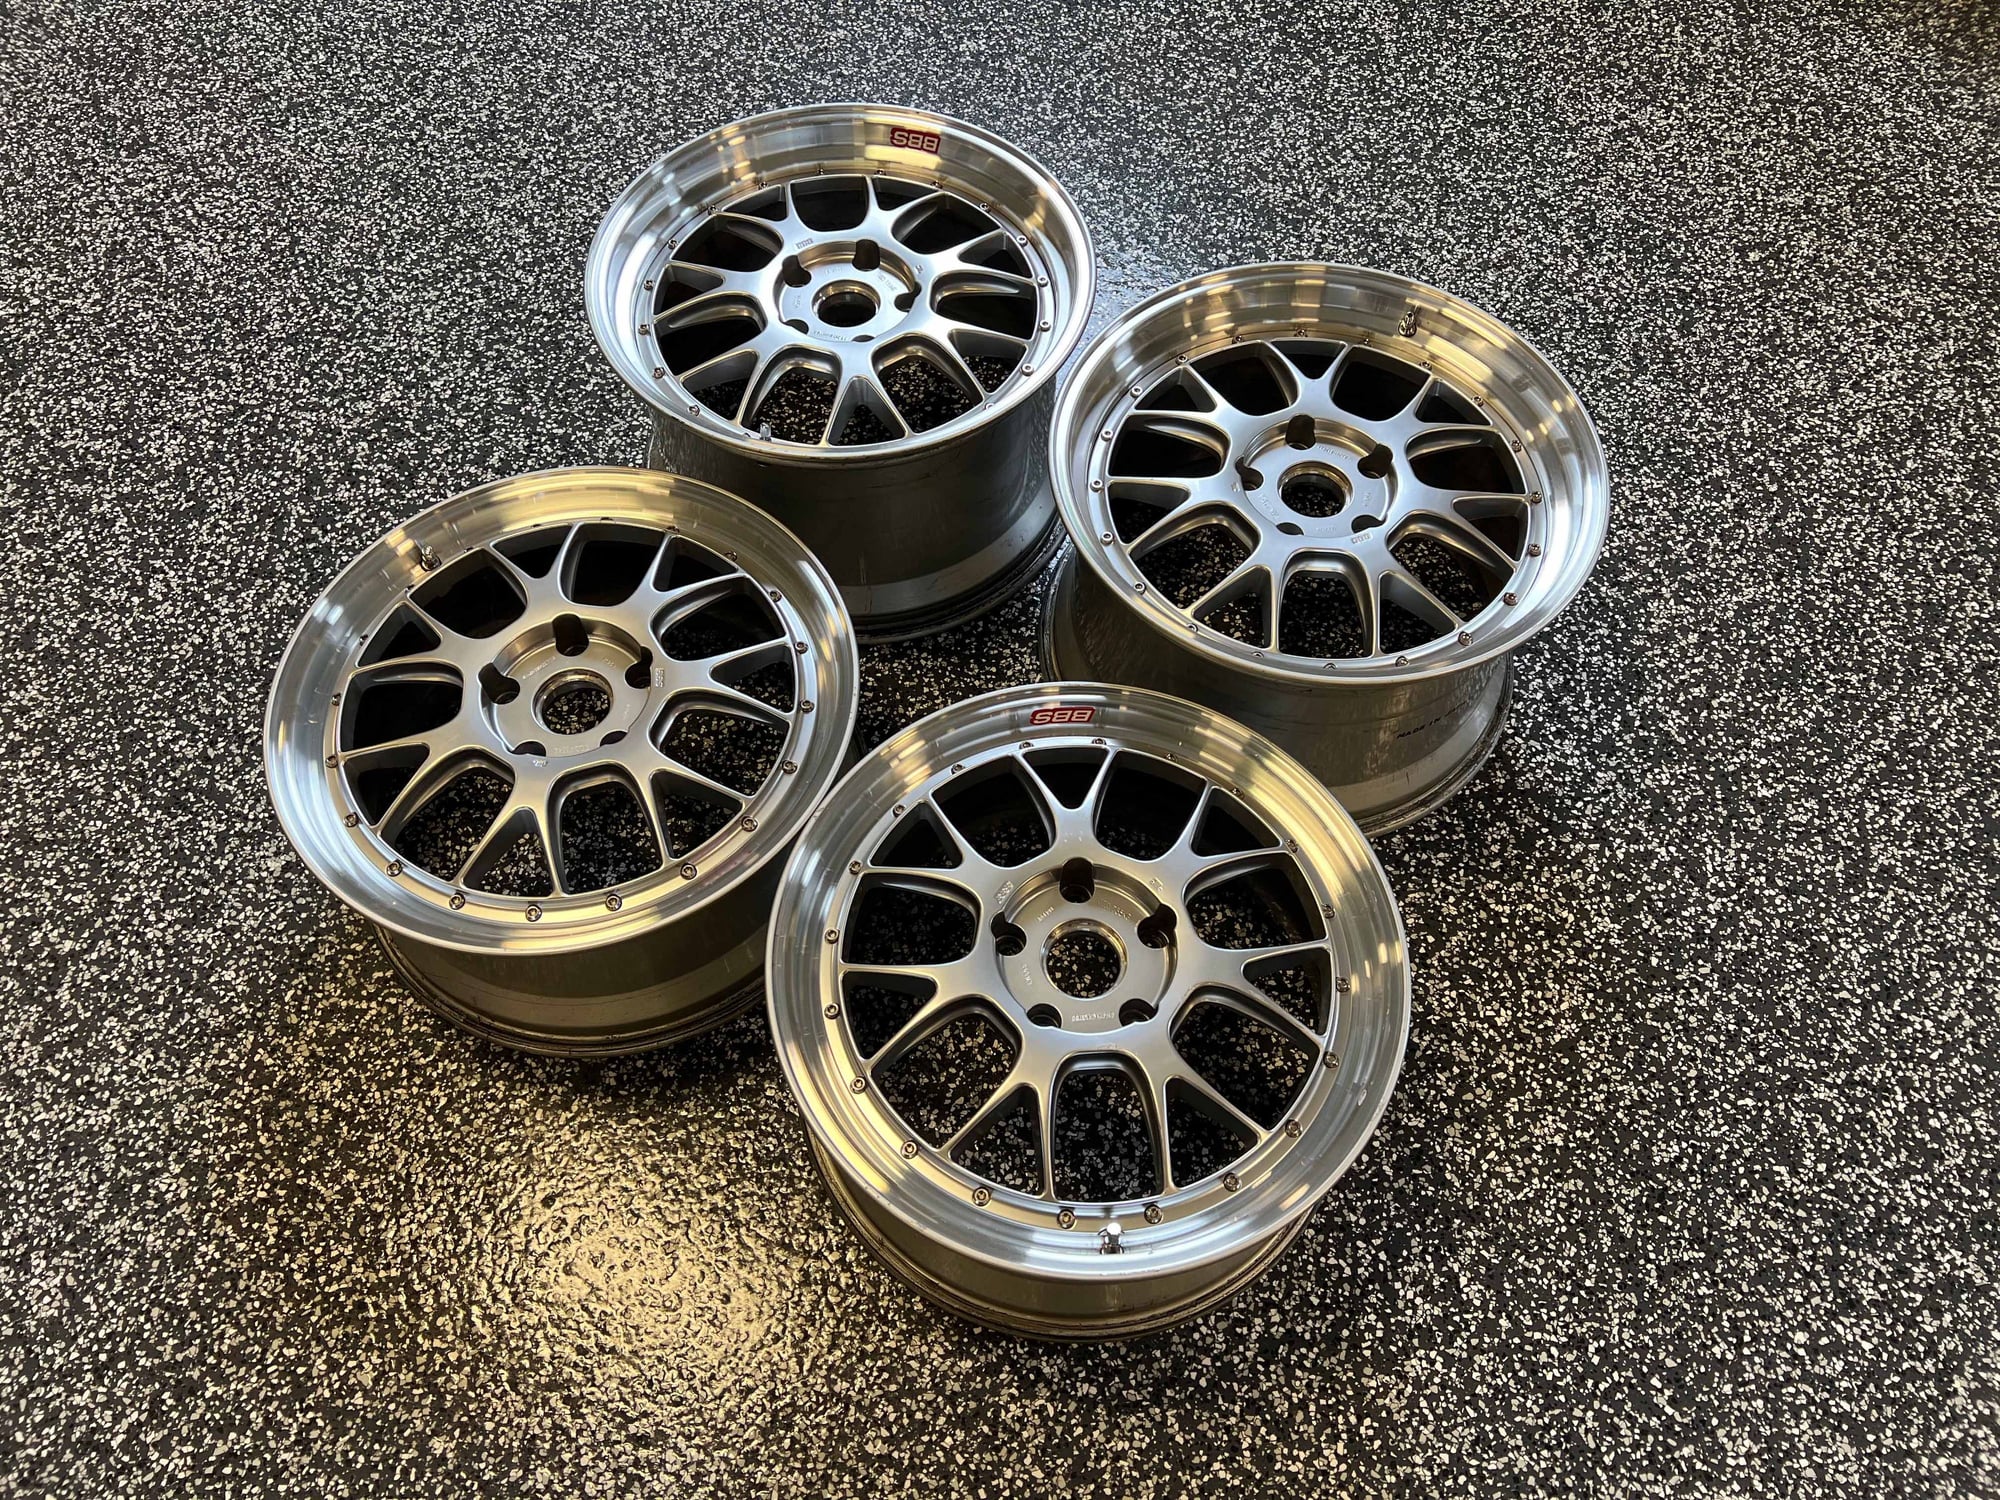 Wheels and Tires/Axles - BBS LM-R Porsche 997 911 19 Inch Wheels - Used - 2006 to 2011 Porsche 911 - West Chester, PA 19382, United States